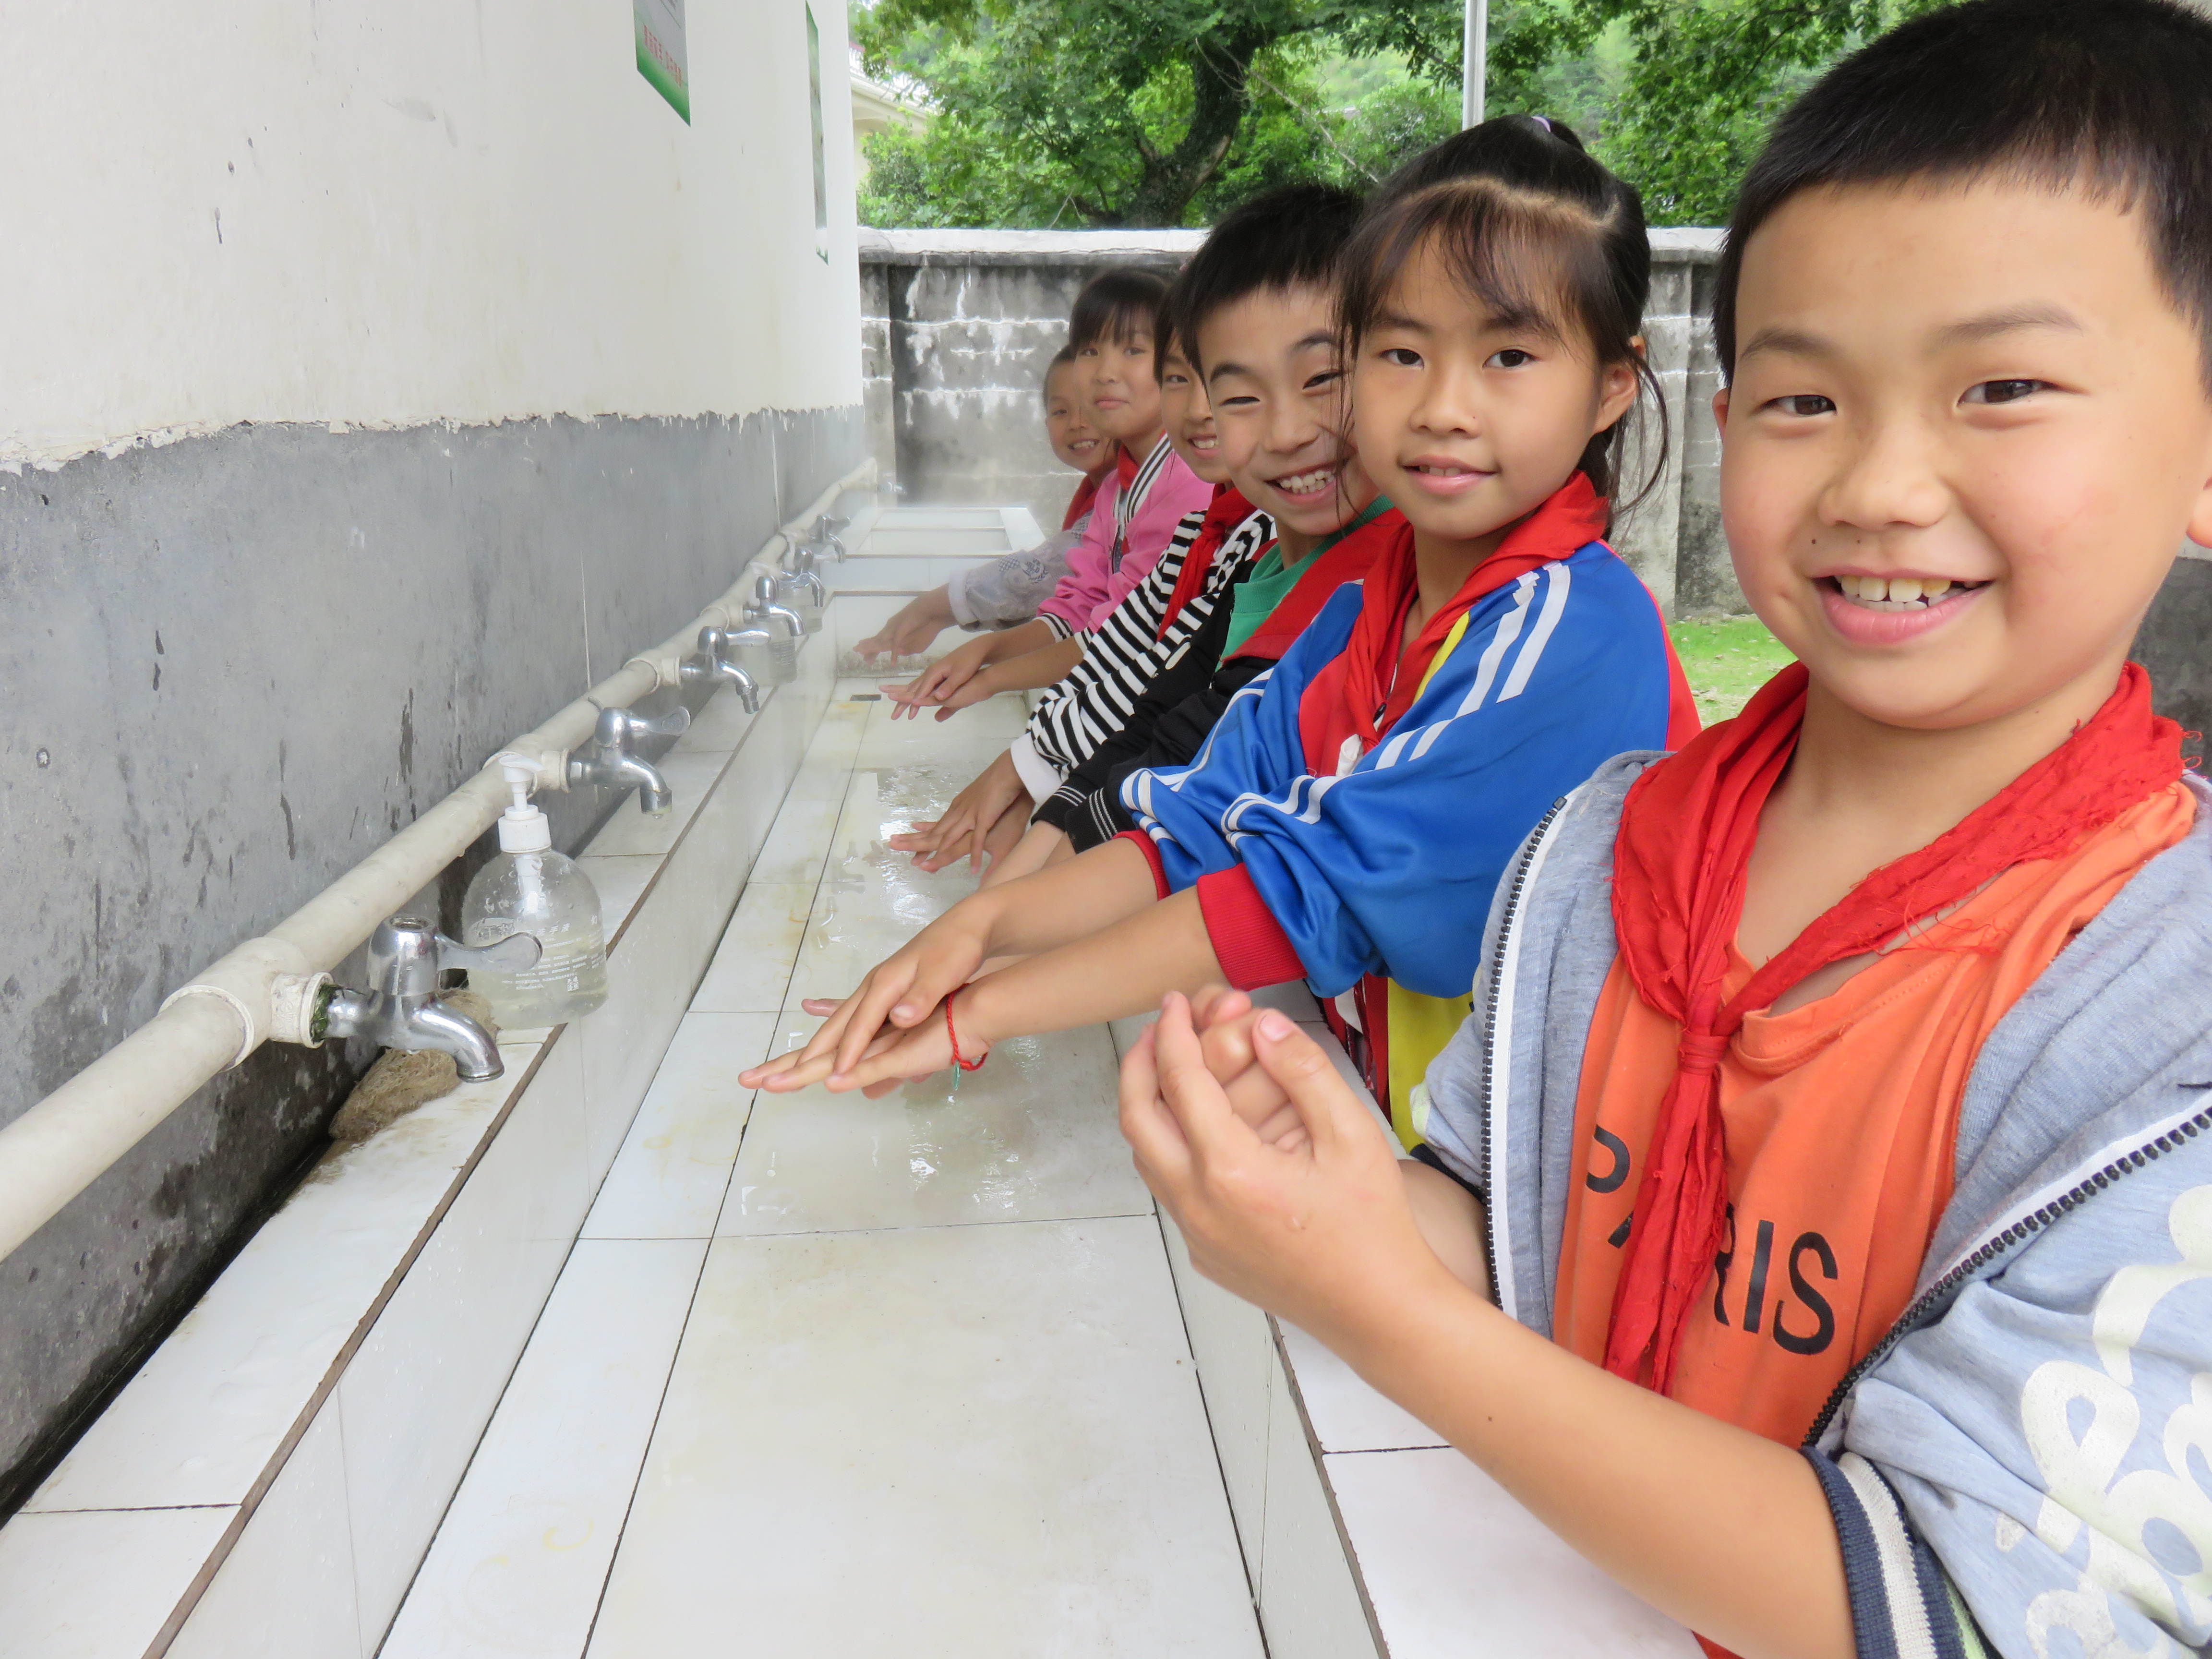 Children in China smile as they demonstrate their hand washing technique in front of sinks